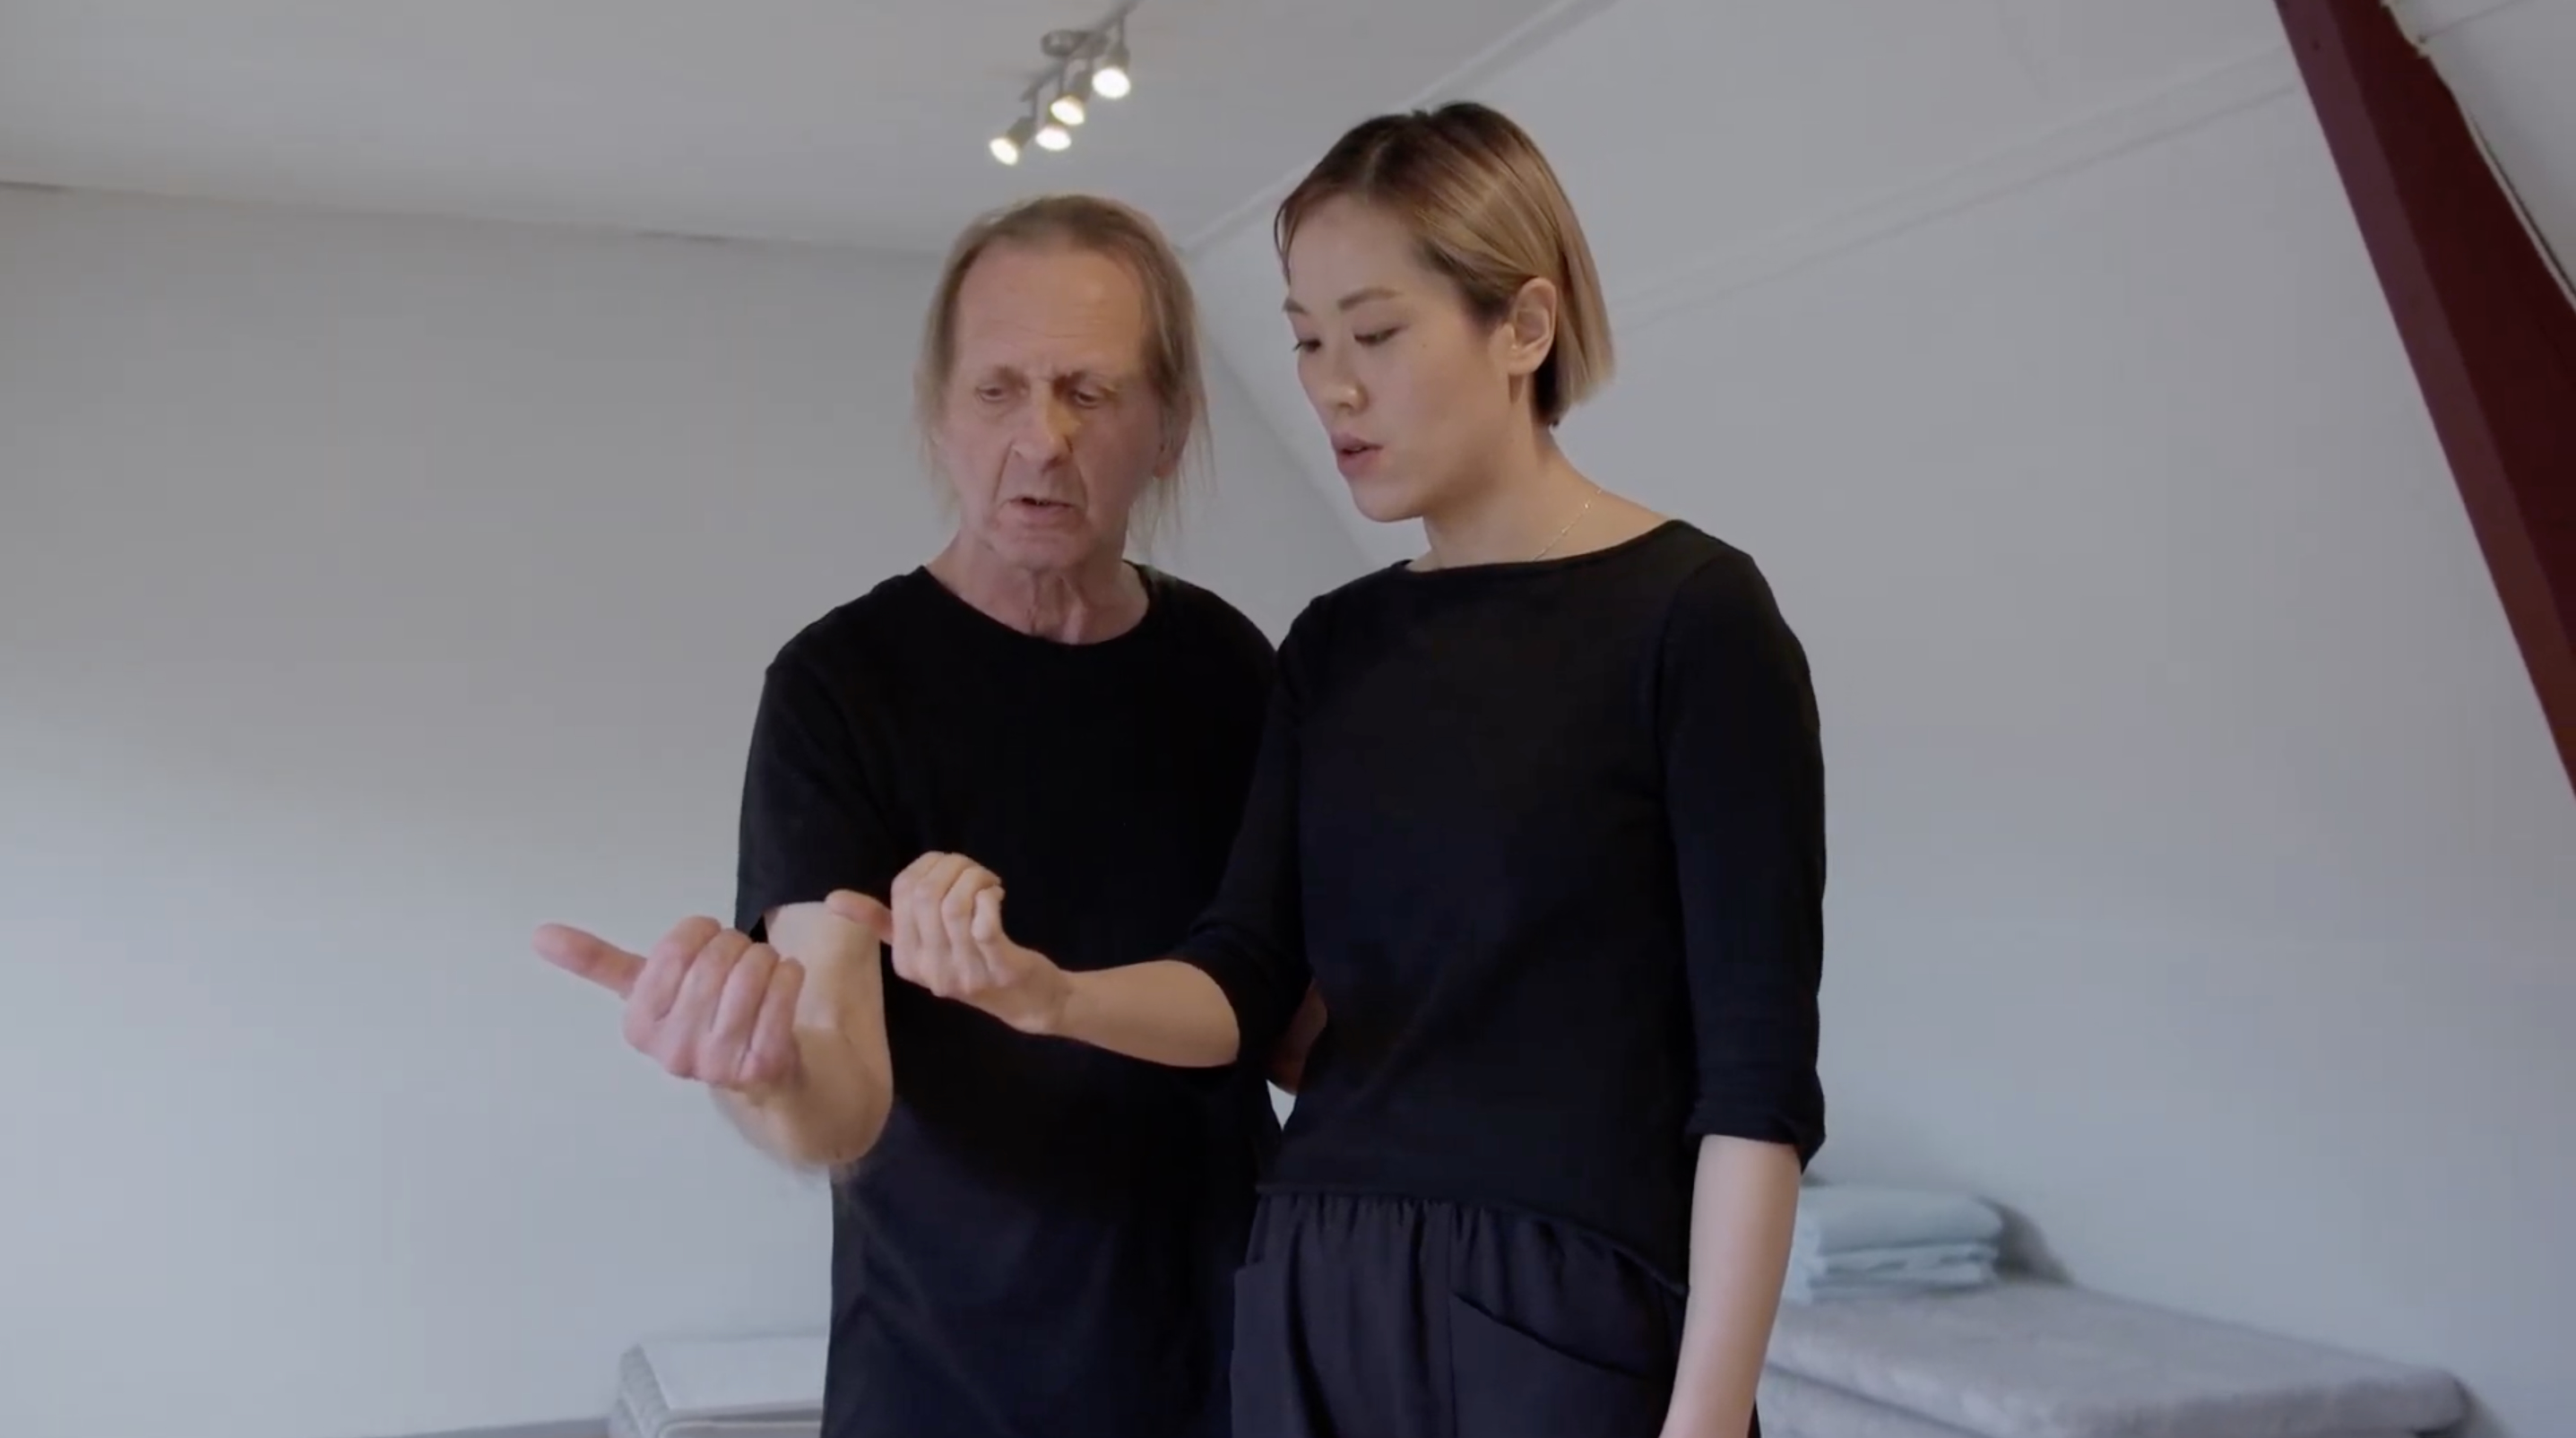 A screenshot of a 12:44 video of a white man and an East Asian woman practicing vocal exercises. They both are staring at their hands, and lifting one hand up in a fist and thumbs-up motion.